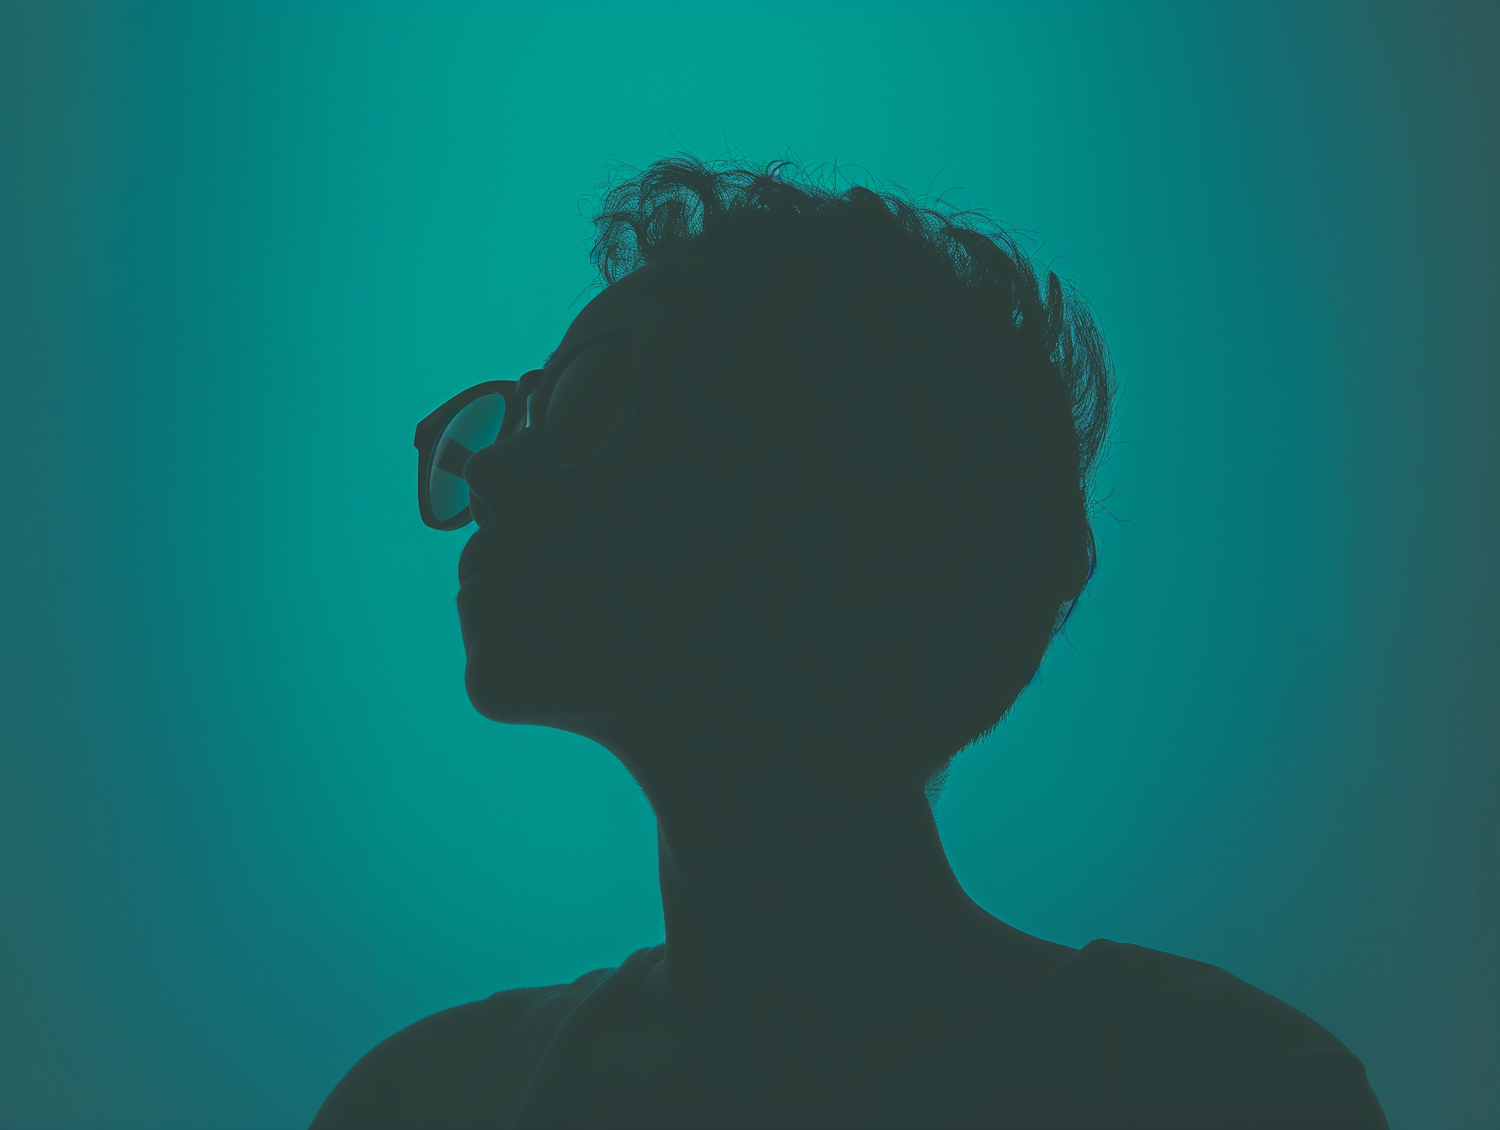 Contemplative Silhouette in Teal